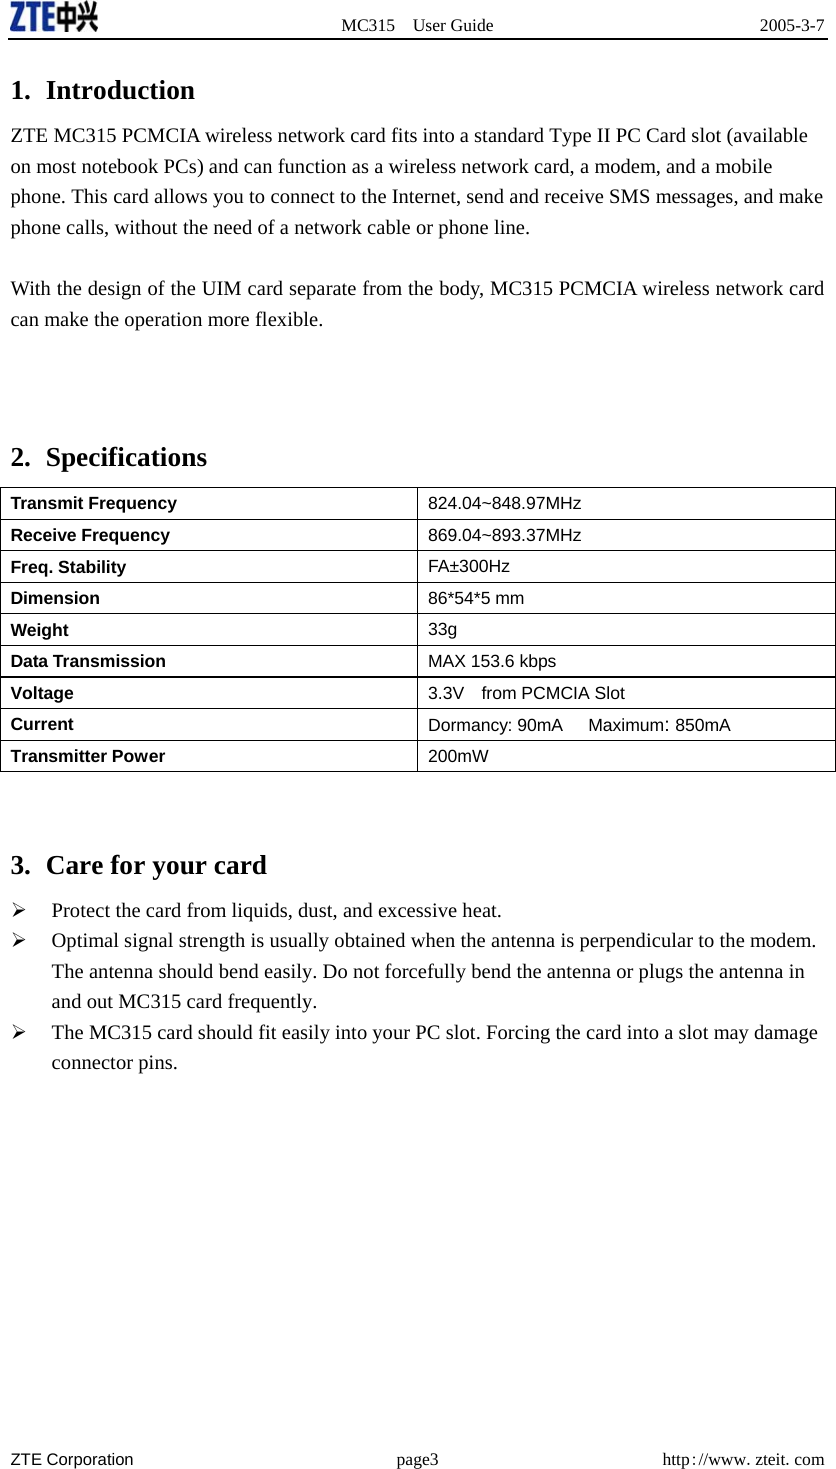  MC315 User Guide  2005-3-7  ZTE Corporation page3 http://www.zteit.com 1. Introduction ZTE MC315 PCMCIA wireless network card fits into a standard Type II PC Card slot (available on most notebook PCs) and can function as a wireless network card, a modem, and a mobile phone. This card allows you to connect to the Internet, send and receive SMS messages, and make phone calls, without the need of a network cable or phone line.  With the design of the UIM card separate from the body, MC315 PCMCIA wireless network card can make the operation more flexible.    2. Specifications   Transmit Frequency  824.04~848.97MHz Receive Frequency  869.04~893.37MHz Freq. Stability  FA±300Hz Dimension  86*54*5 mm Weight  33g Data Transmission  MAX 153.6 kbps Voltage 3.3V    from PCMCIA Slot Current Dormancy: 90mA   Maximum: 850mA Transmitter Power 200mW   3.  Care for your card       Protect the card from liquids, dust, and excessive heat.   Optimal signal strength is usually obtained when the antenna is perpendicular to the modem. The antenna should bend easily. Do not forcefully bend the antenna or plugs the antenna in and out MC315 card frequently.   The MC315 card should fit easily into your PC slot. Forcing the card into a slot may damage connector pins.   